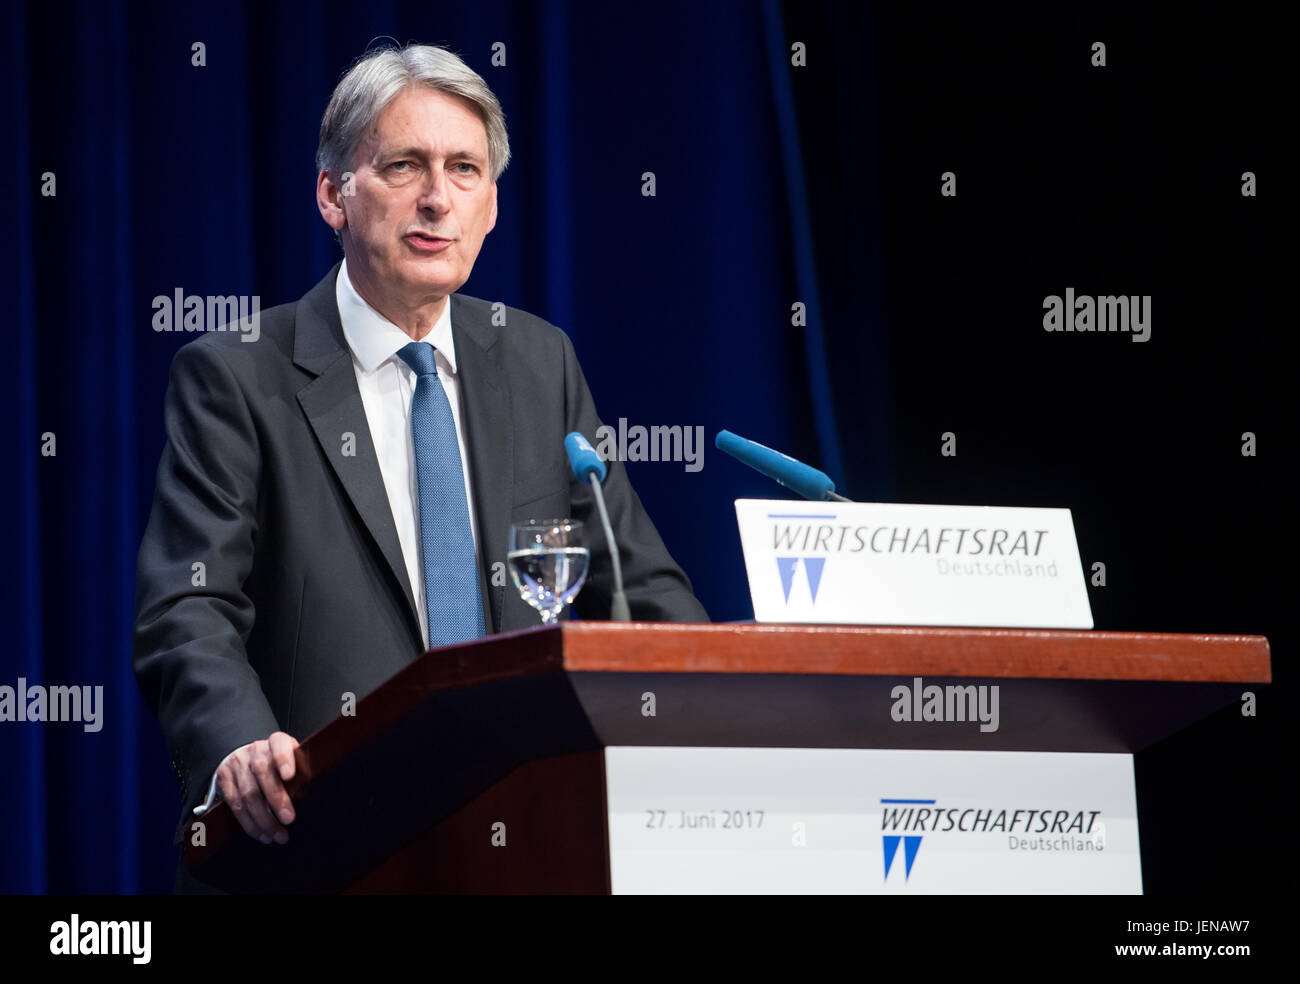 Berlin, Germany. 27th June, 2017. British Minister of Finance Philip Hammond speaks during the Economy Day of the Economic Council of the Christian-Democratic Union (CDU) in Berlin, Germany, 27 June 2017. Around 3,500 representatives from politics, economy and science participate in the event with the motto 'Welt im Wandel : Fuer Freiheit und Sicherheit' (lit. 'Changing World : For Freedom and Security'). Photo: Bernd von Jutrczenka/dpa/Alamy Live News Stock Photo